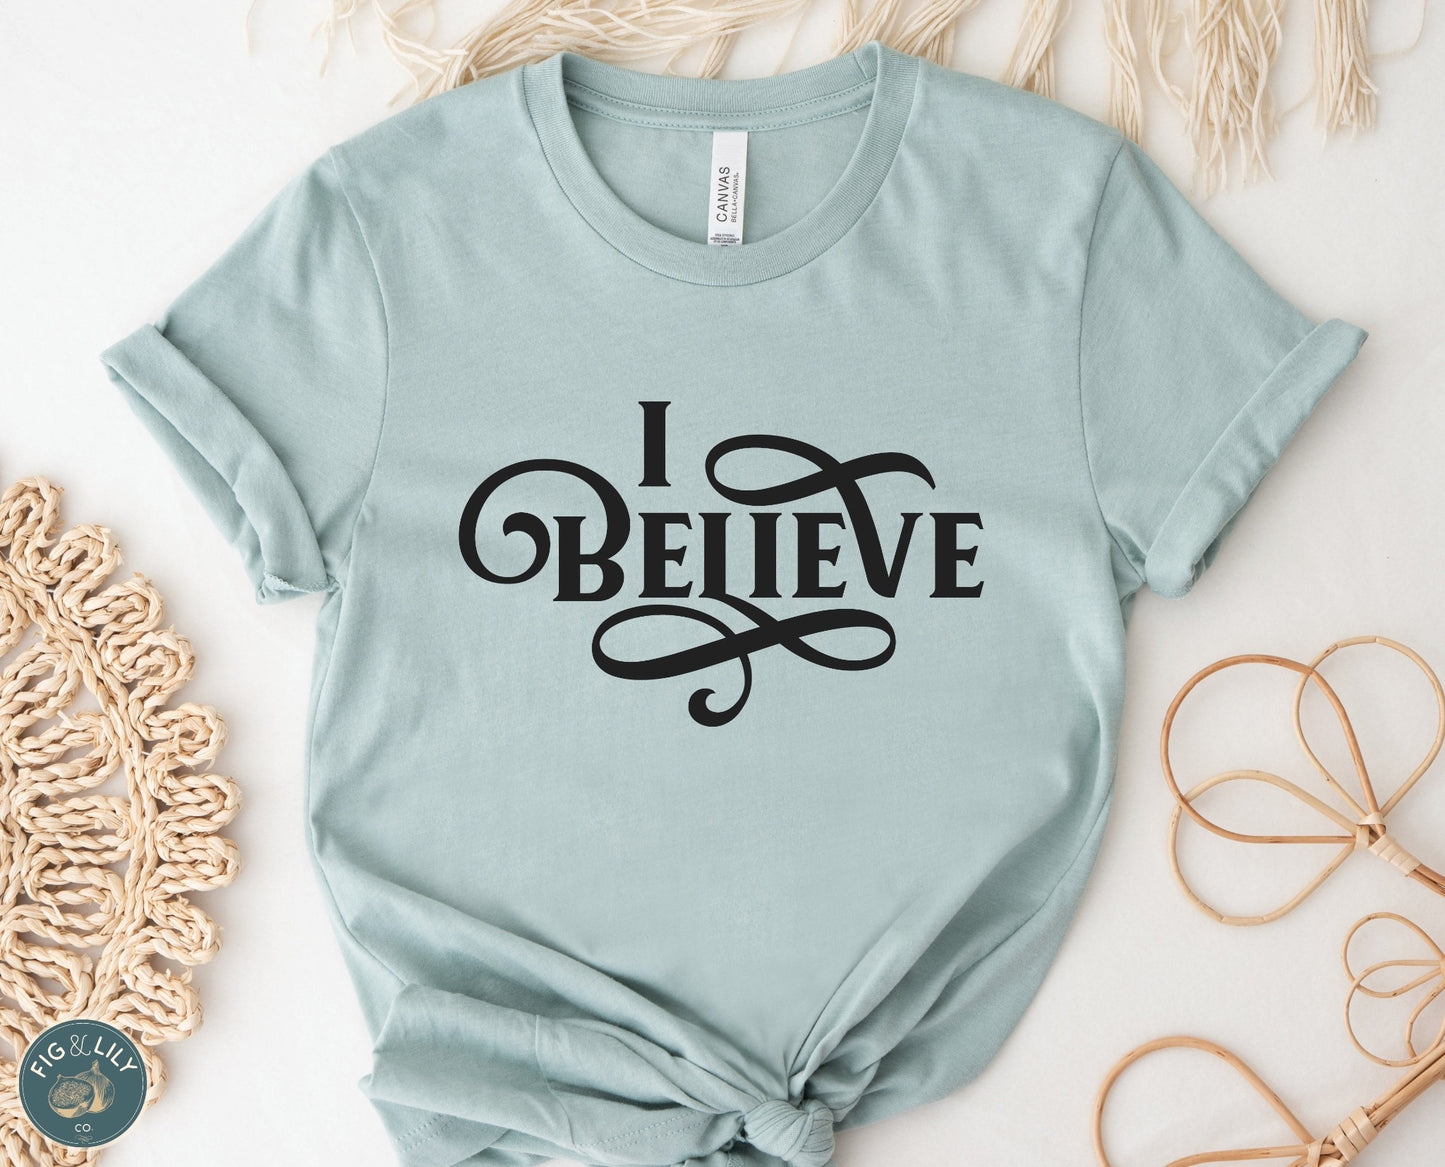 I Believe Swirl Christian aesthetic Jesus believer t-shirt design printed in black on soft heather dusty blue tee for women, great gift for her